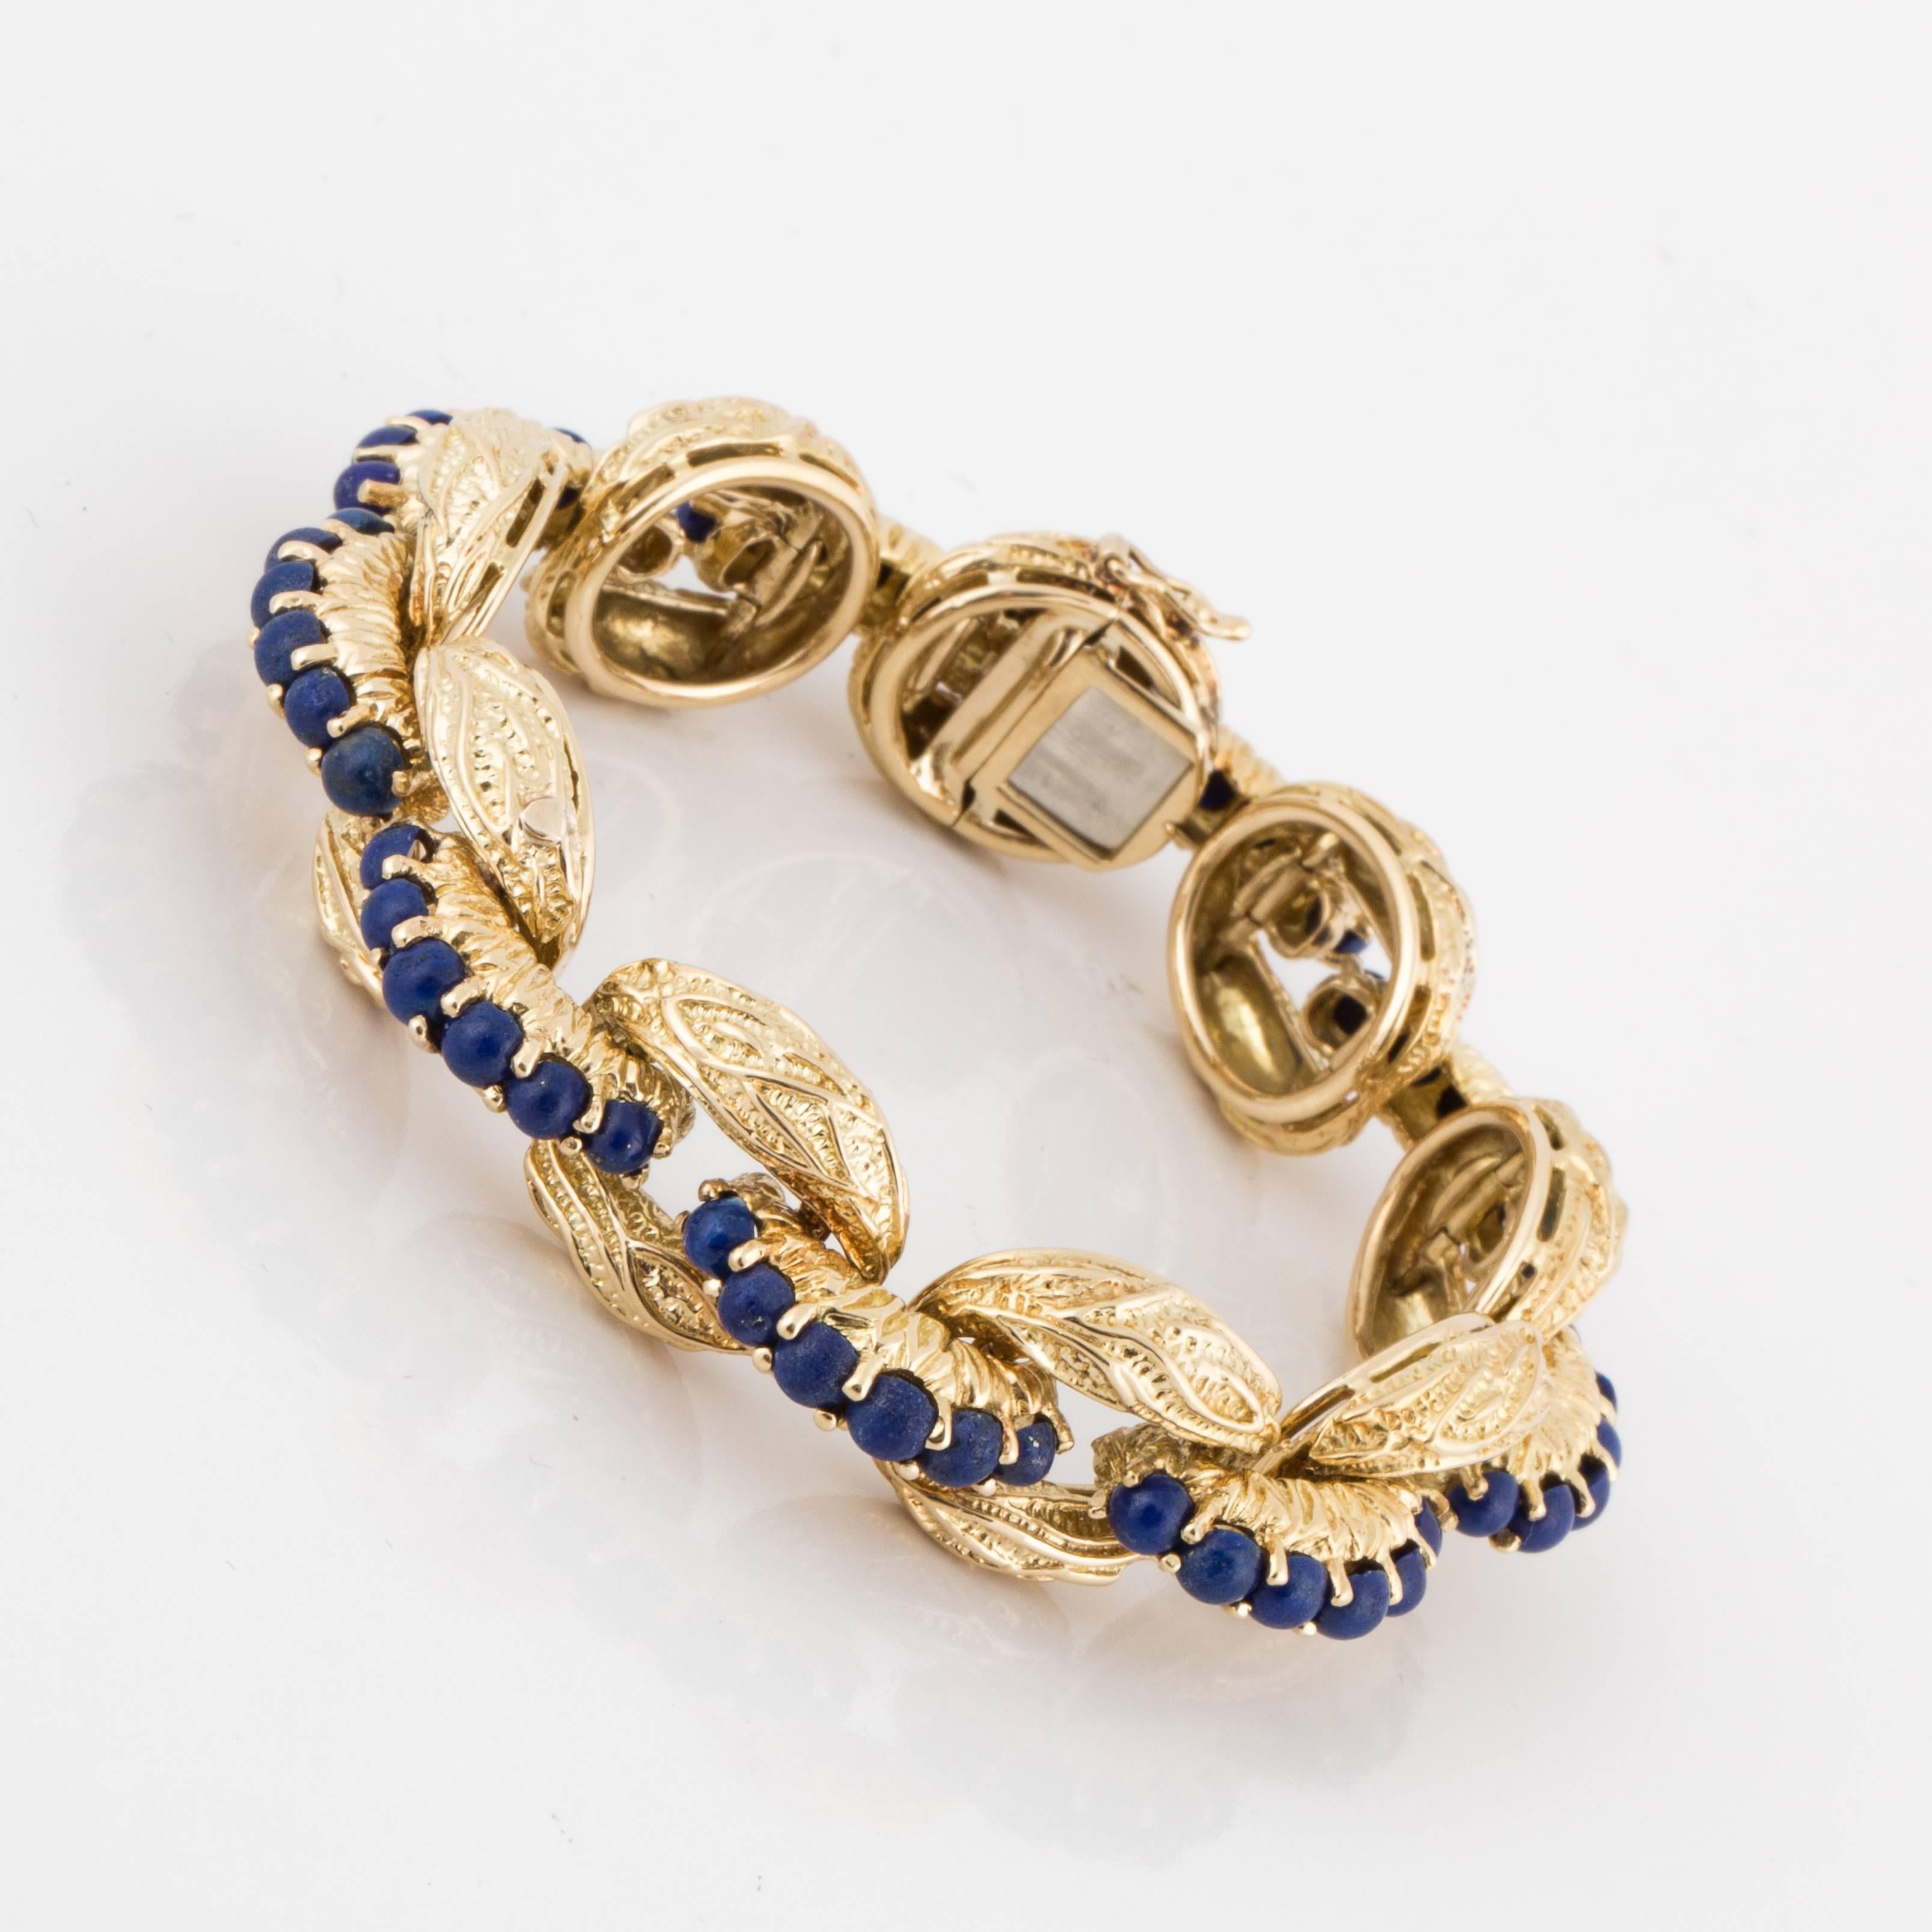 Tiffany & Co. textured oval link bracelet in 18K yellow gold with lapis beads down the center adjoining the links.  There are a total of 47 lapis beads.  The bracelet measures 7 3/8 inches long and it is 5/8 inches wide.  